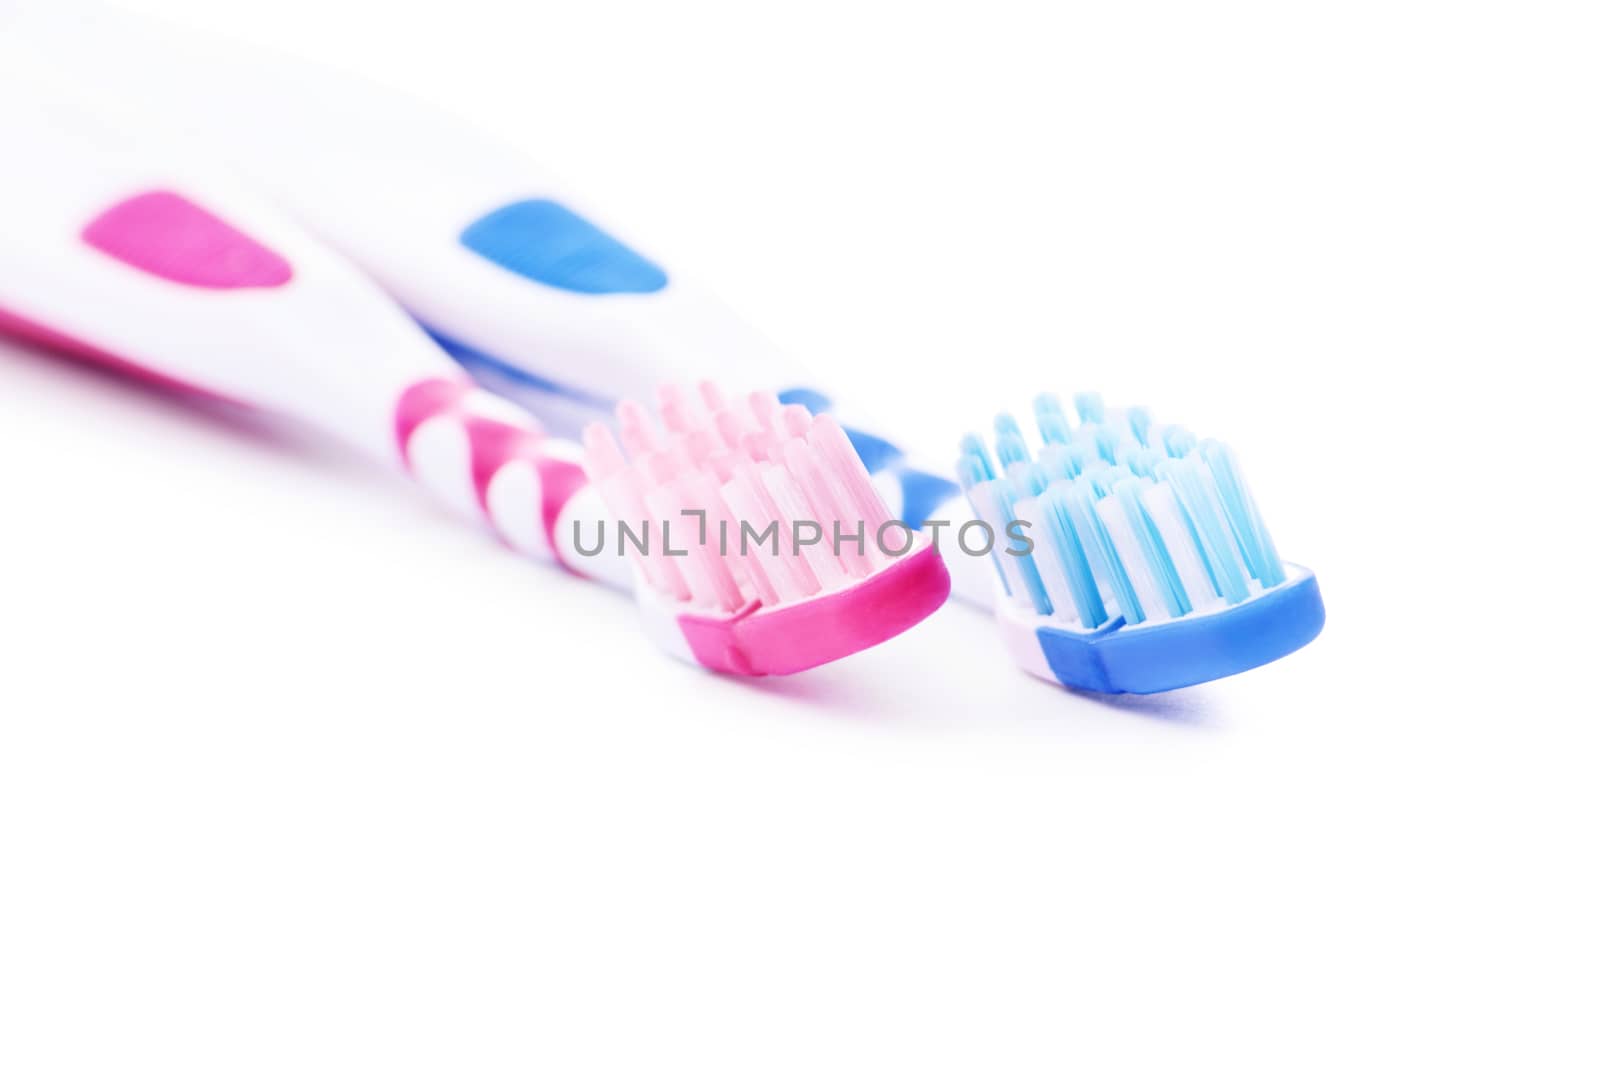 Set of toothbrushes, for him and her, isolated on white background.